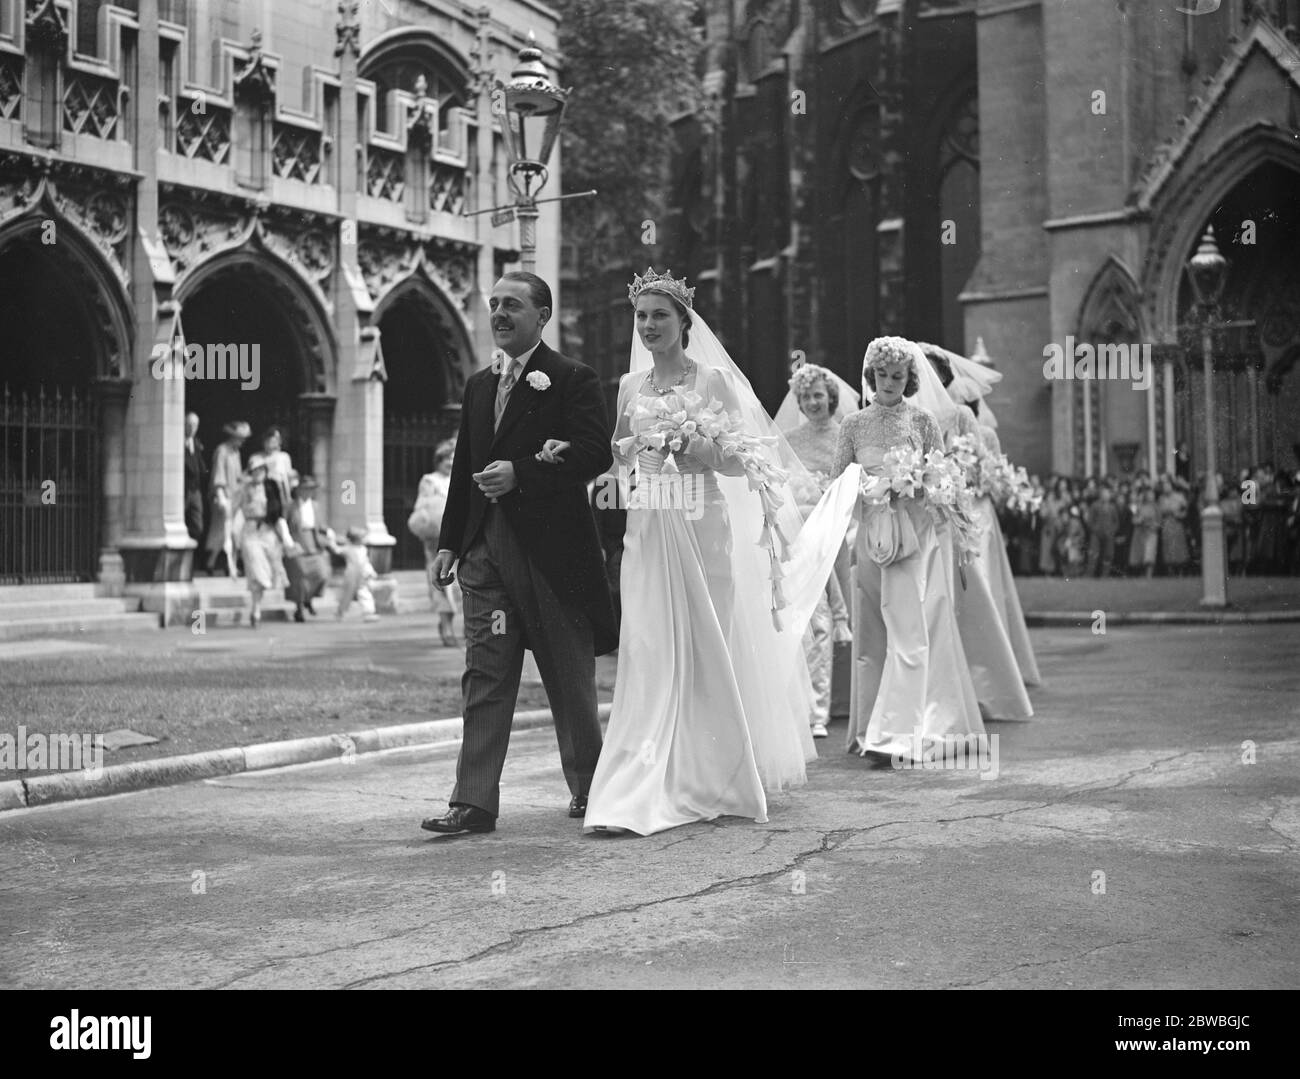 The wedding of Viscount Cowdray to the Earl of Bradford ' s daughter , Lady Anne Bridgeman , which took place today at St Margaret ' s Church , Westminster , London . Here the bride and groom leave the church with their bridesmaids . 19 July 1939 Stock Photo